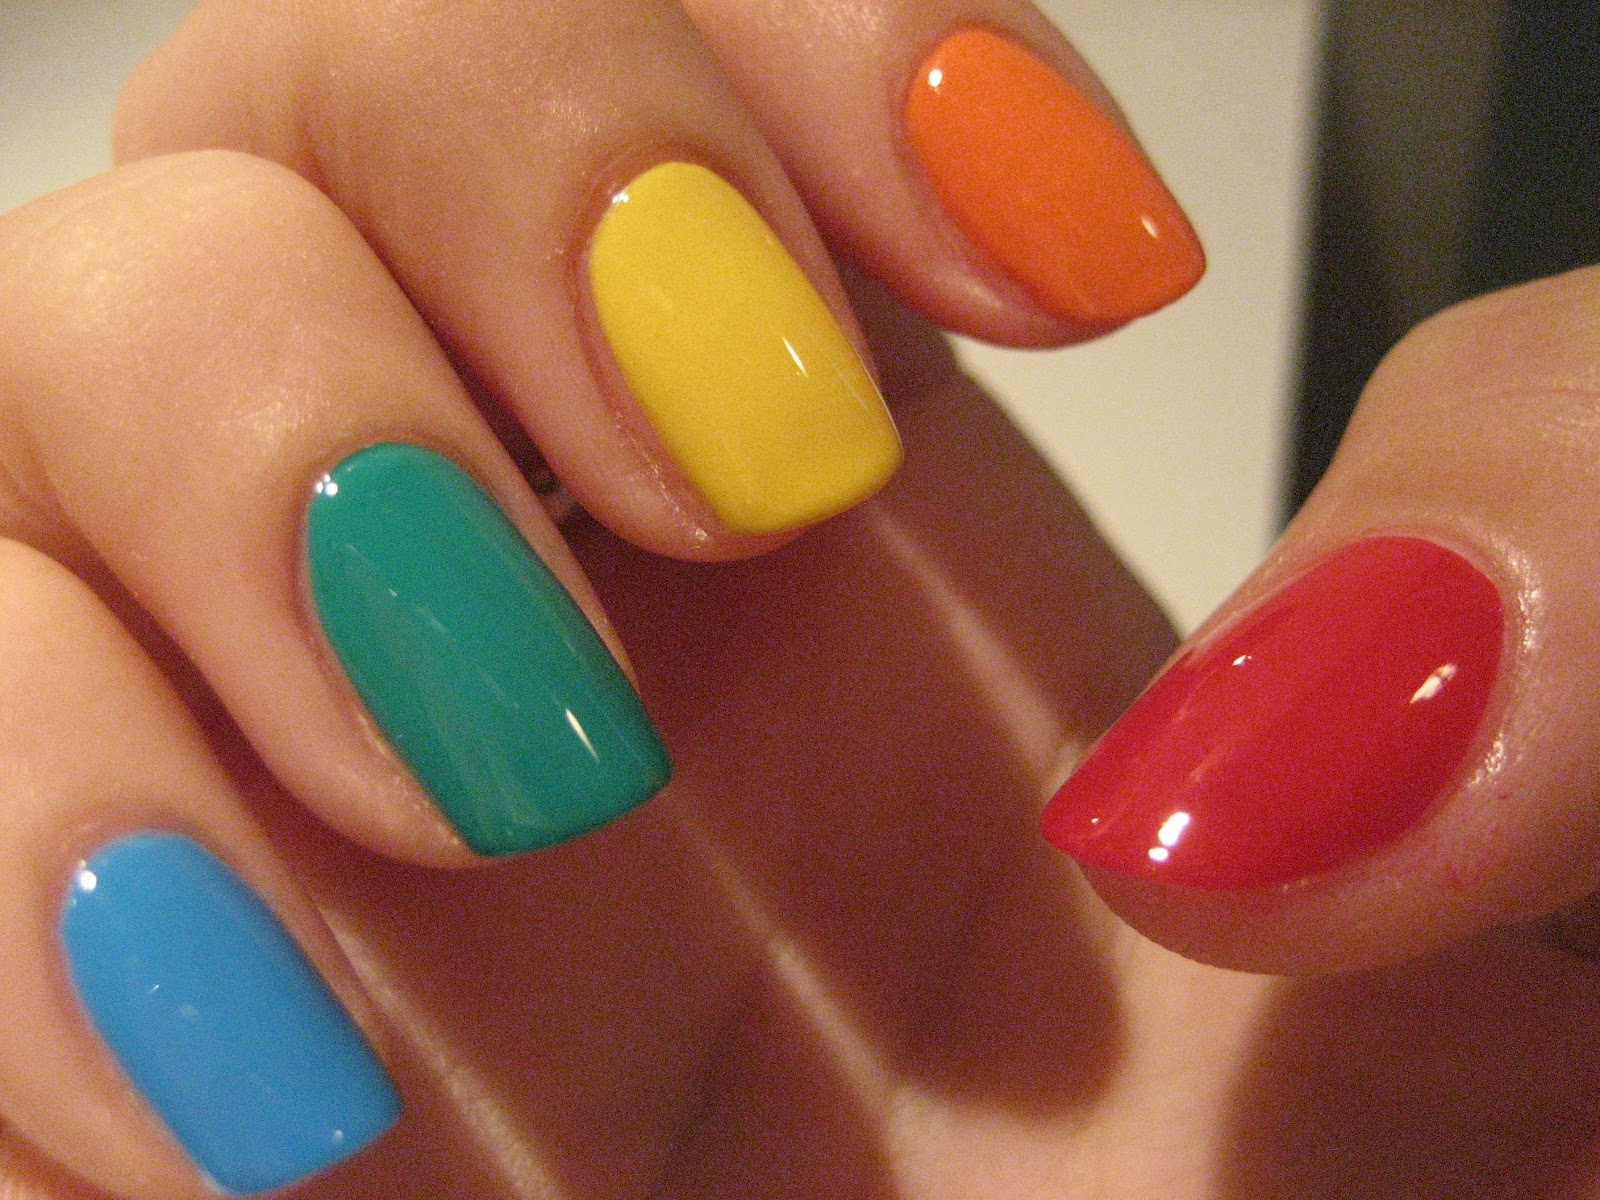 8. Acrylic Nails - wide 8